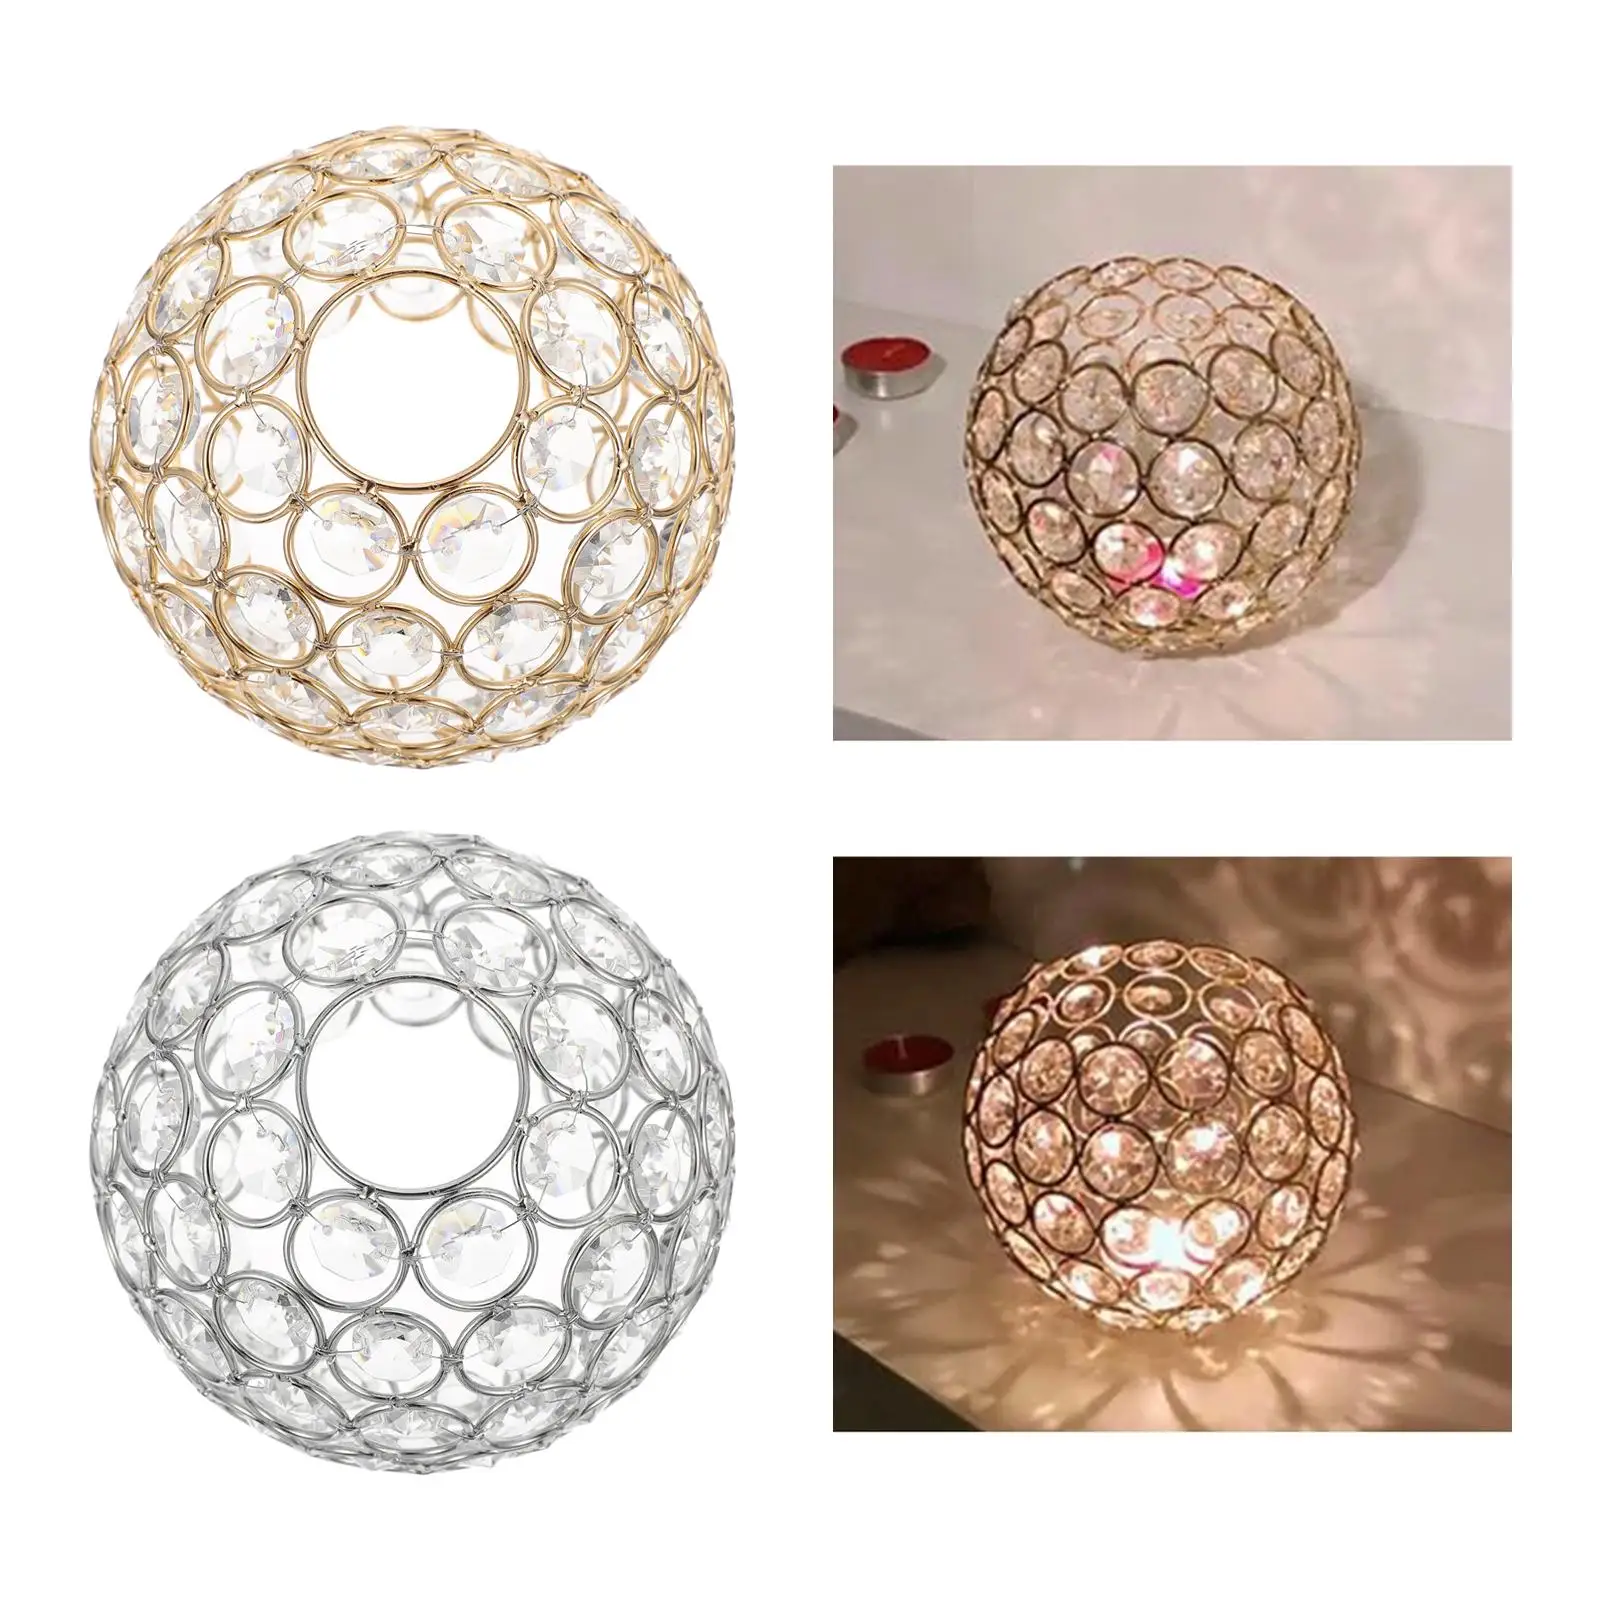 Shiny Ceiling Light Shade Replacement Cover Fitting Chandelier Crystal Lampshade Only for Wedding Bathroom Home Library Party